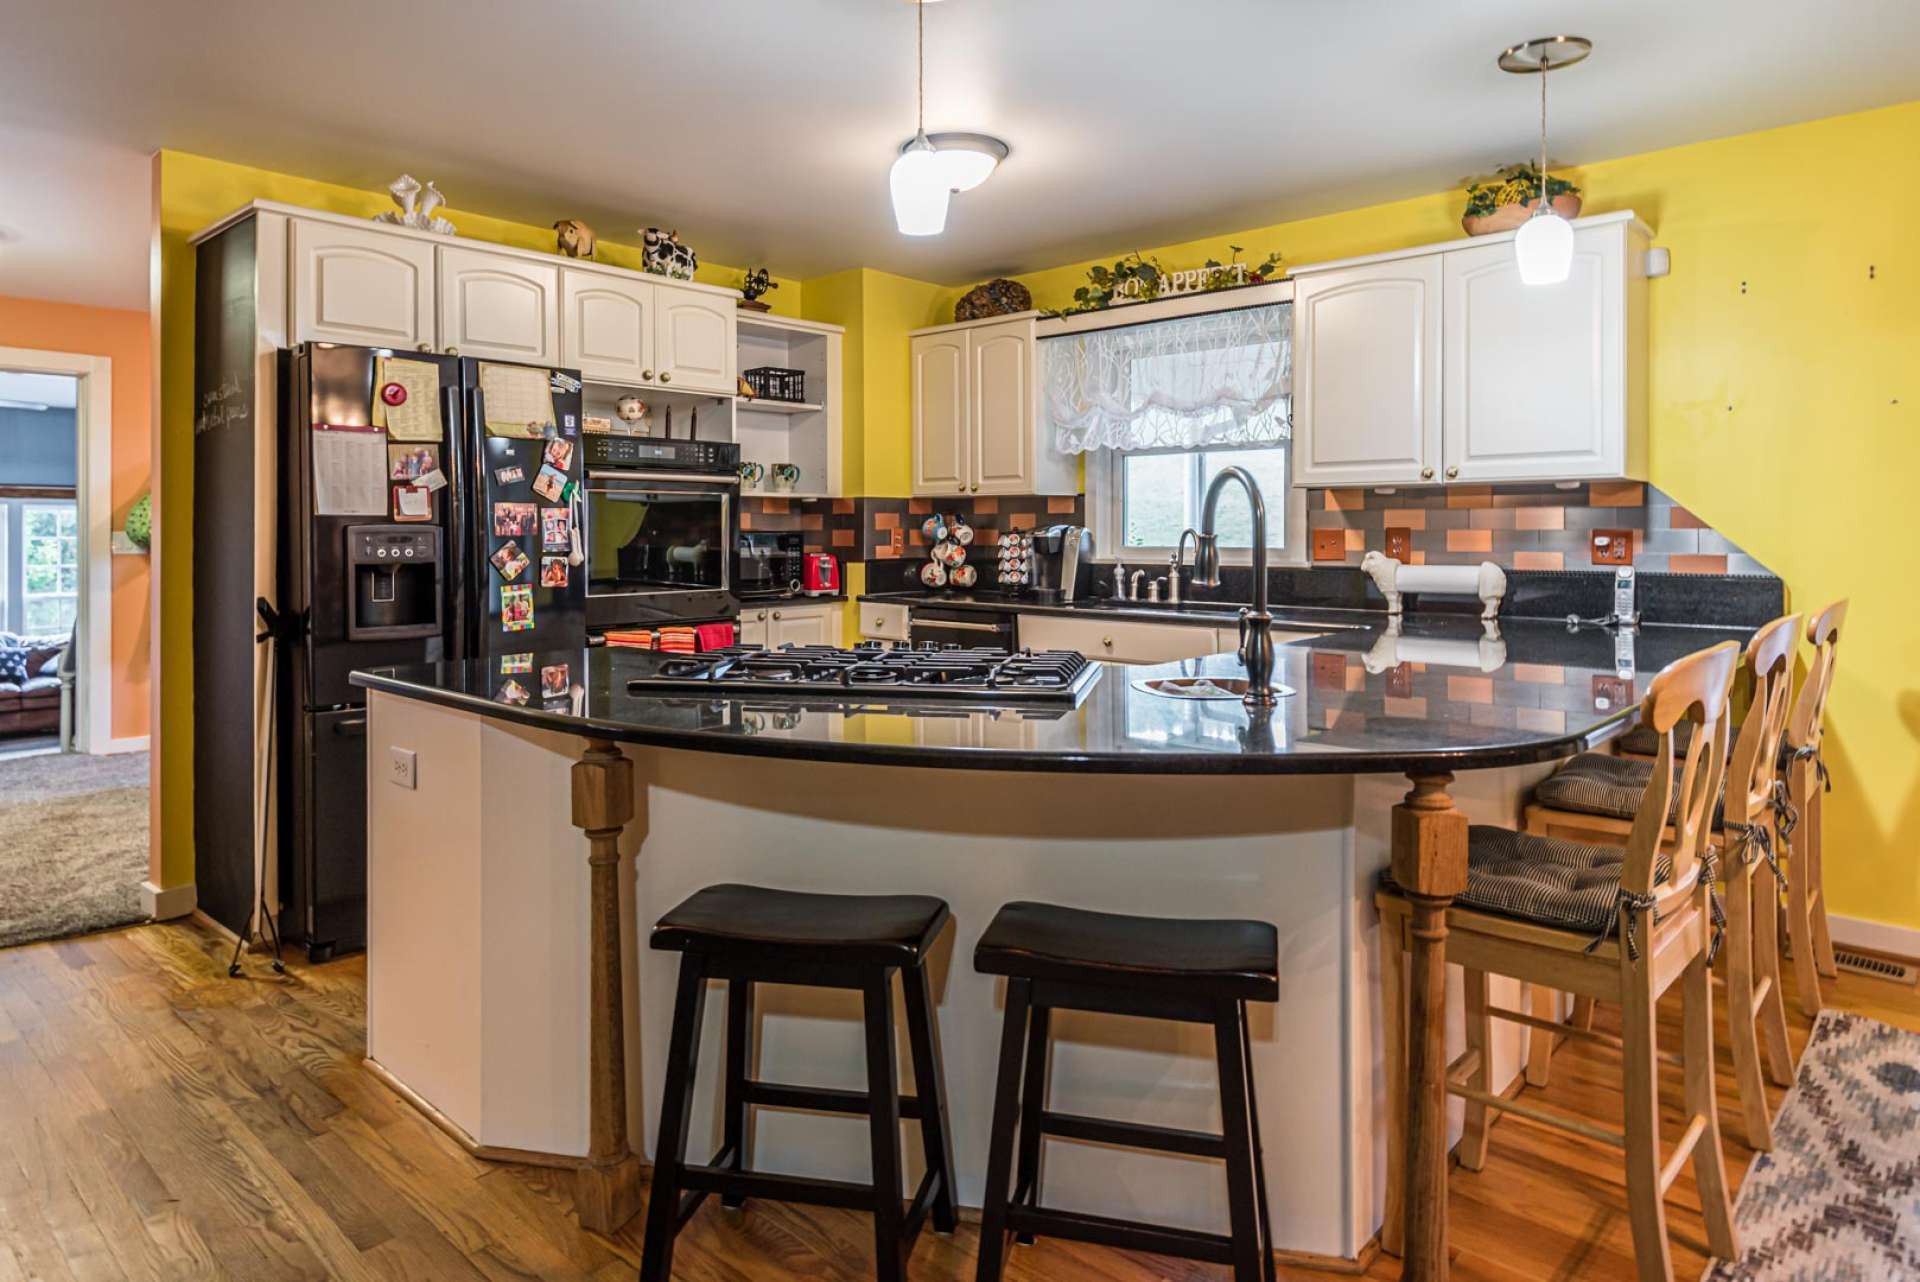 A fully equipped step saving kitchen offers granite countertops, plenty of work and storage space, and bar seating.